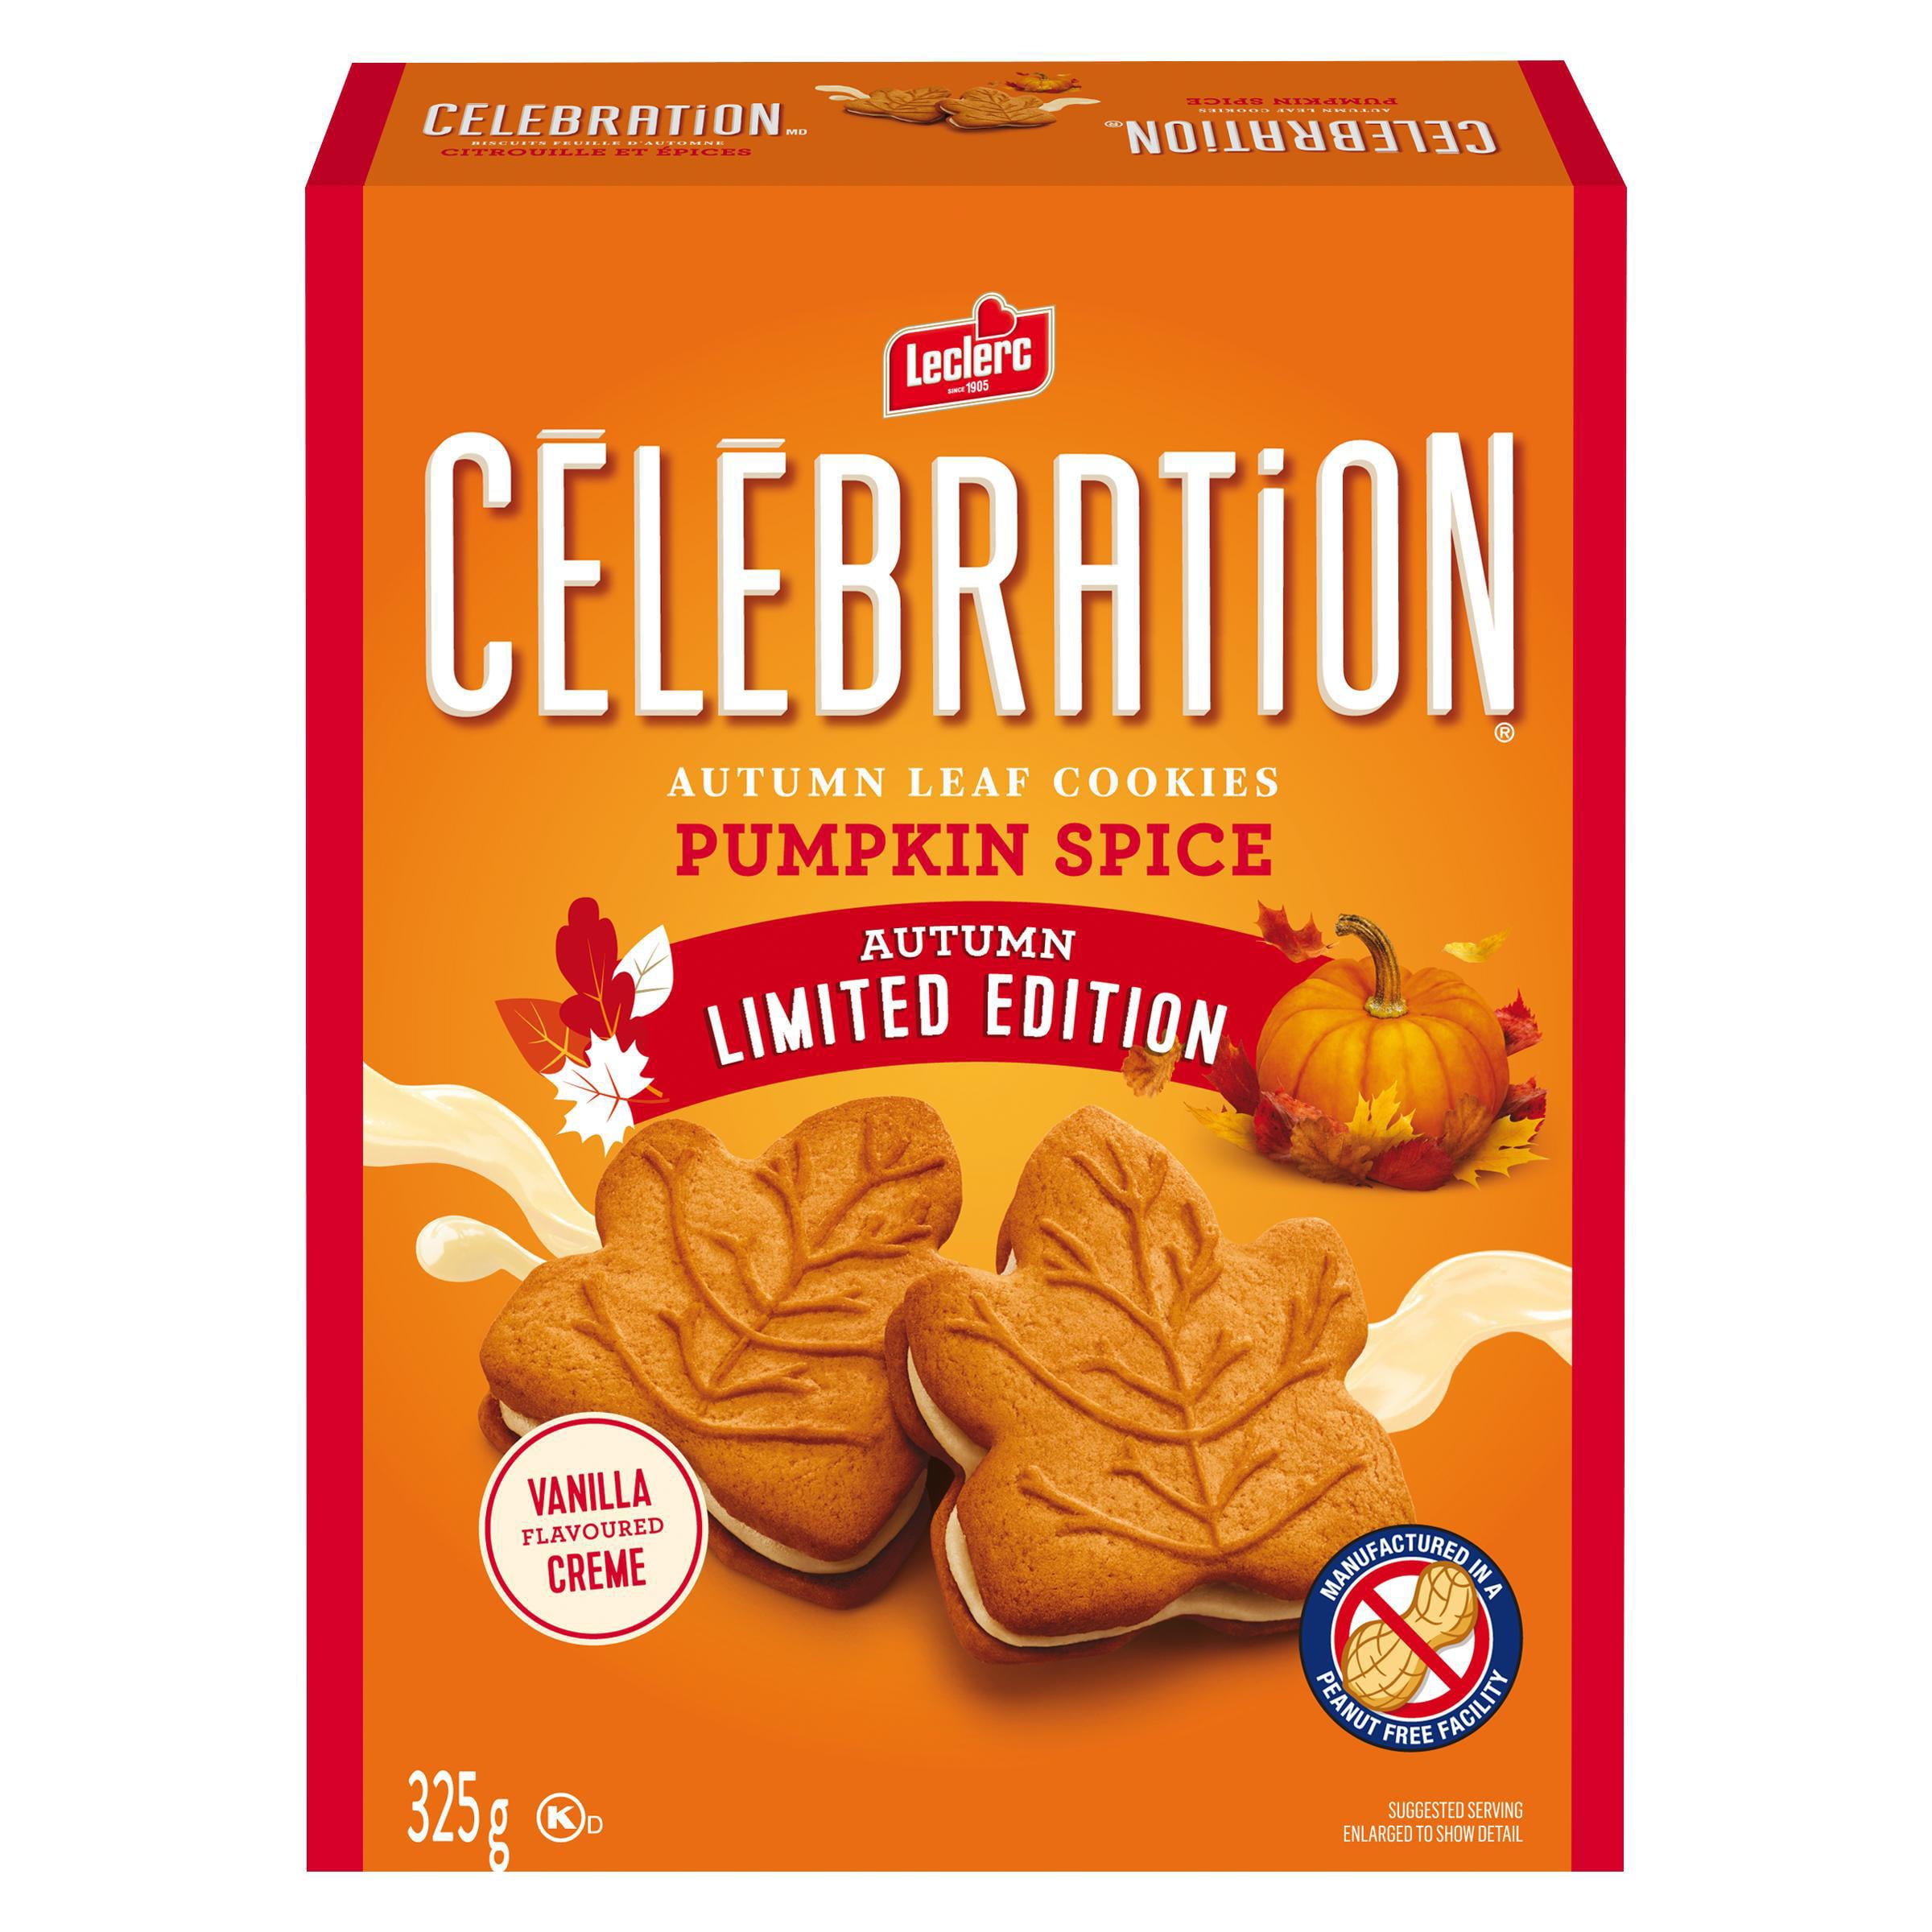 Leclerc Celebration Autumn Leaf Pumpkin Spice Flavored Cookies, 325g/11.4 oz. Box {Imported from Canada}